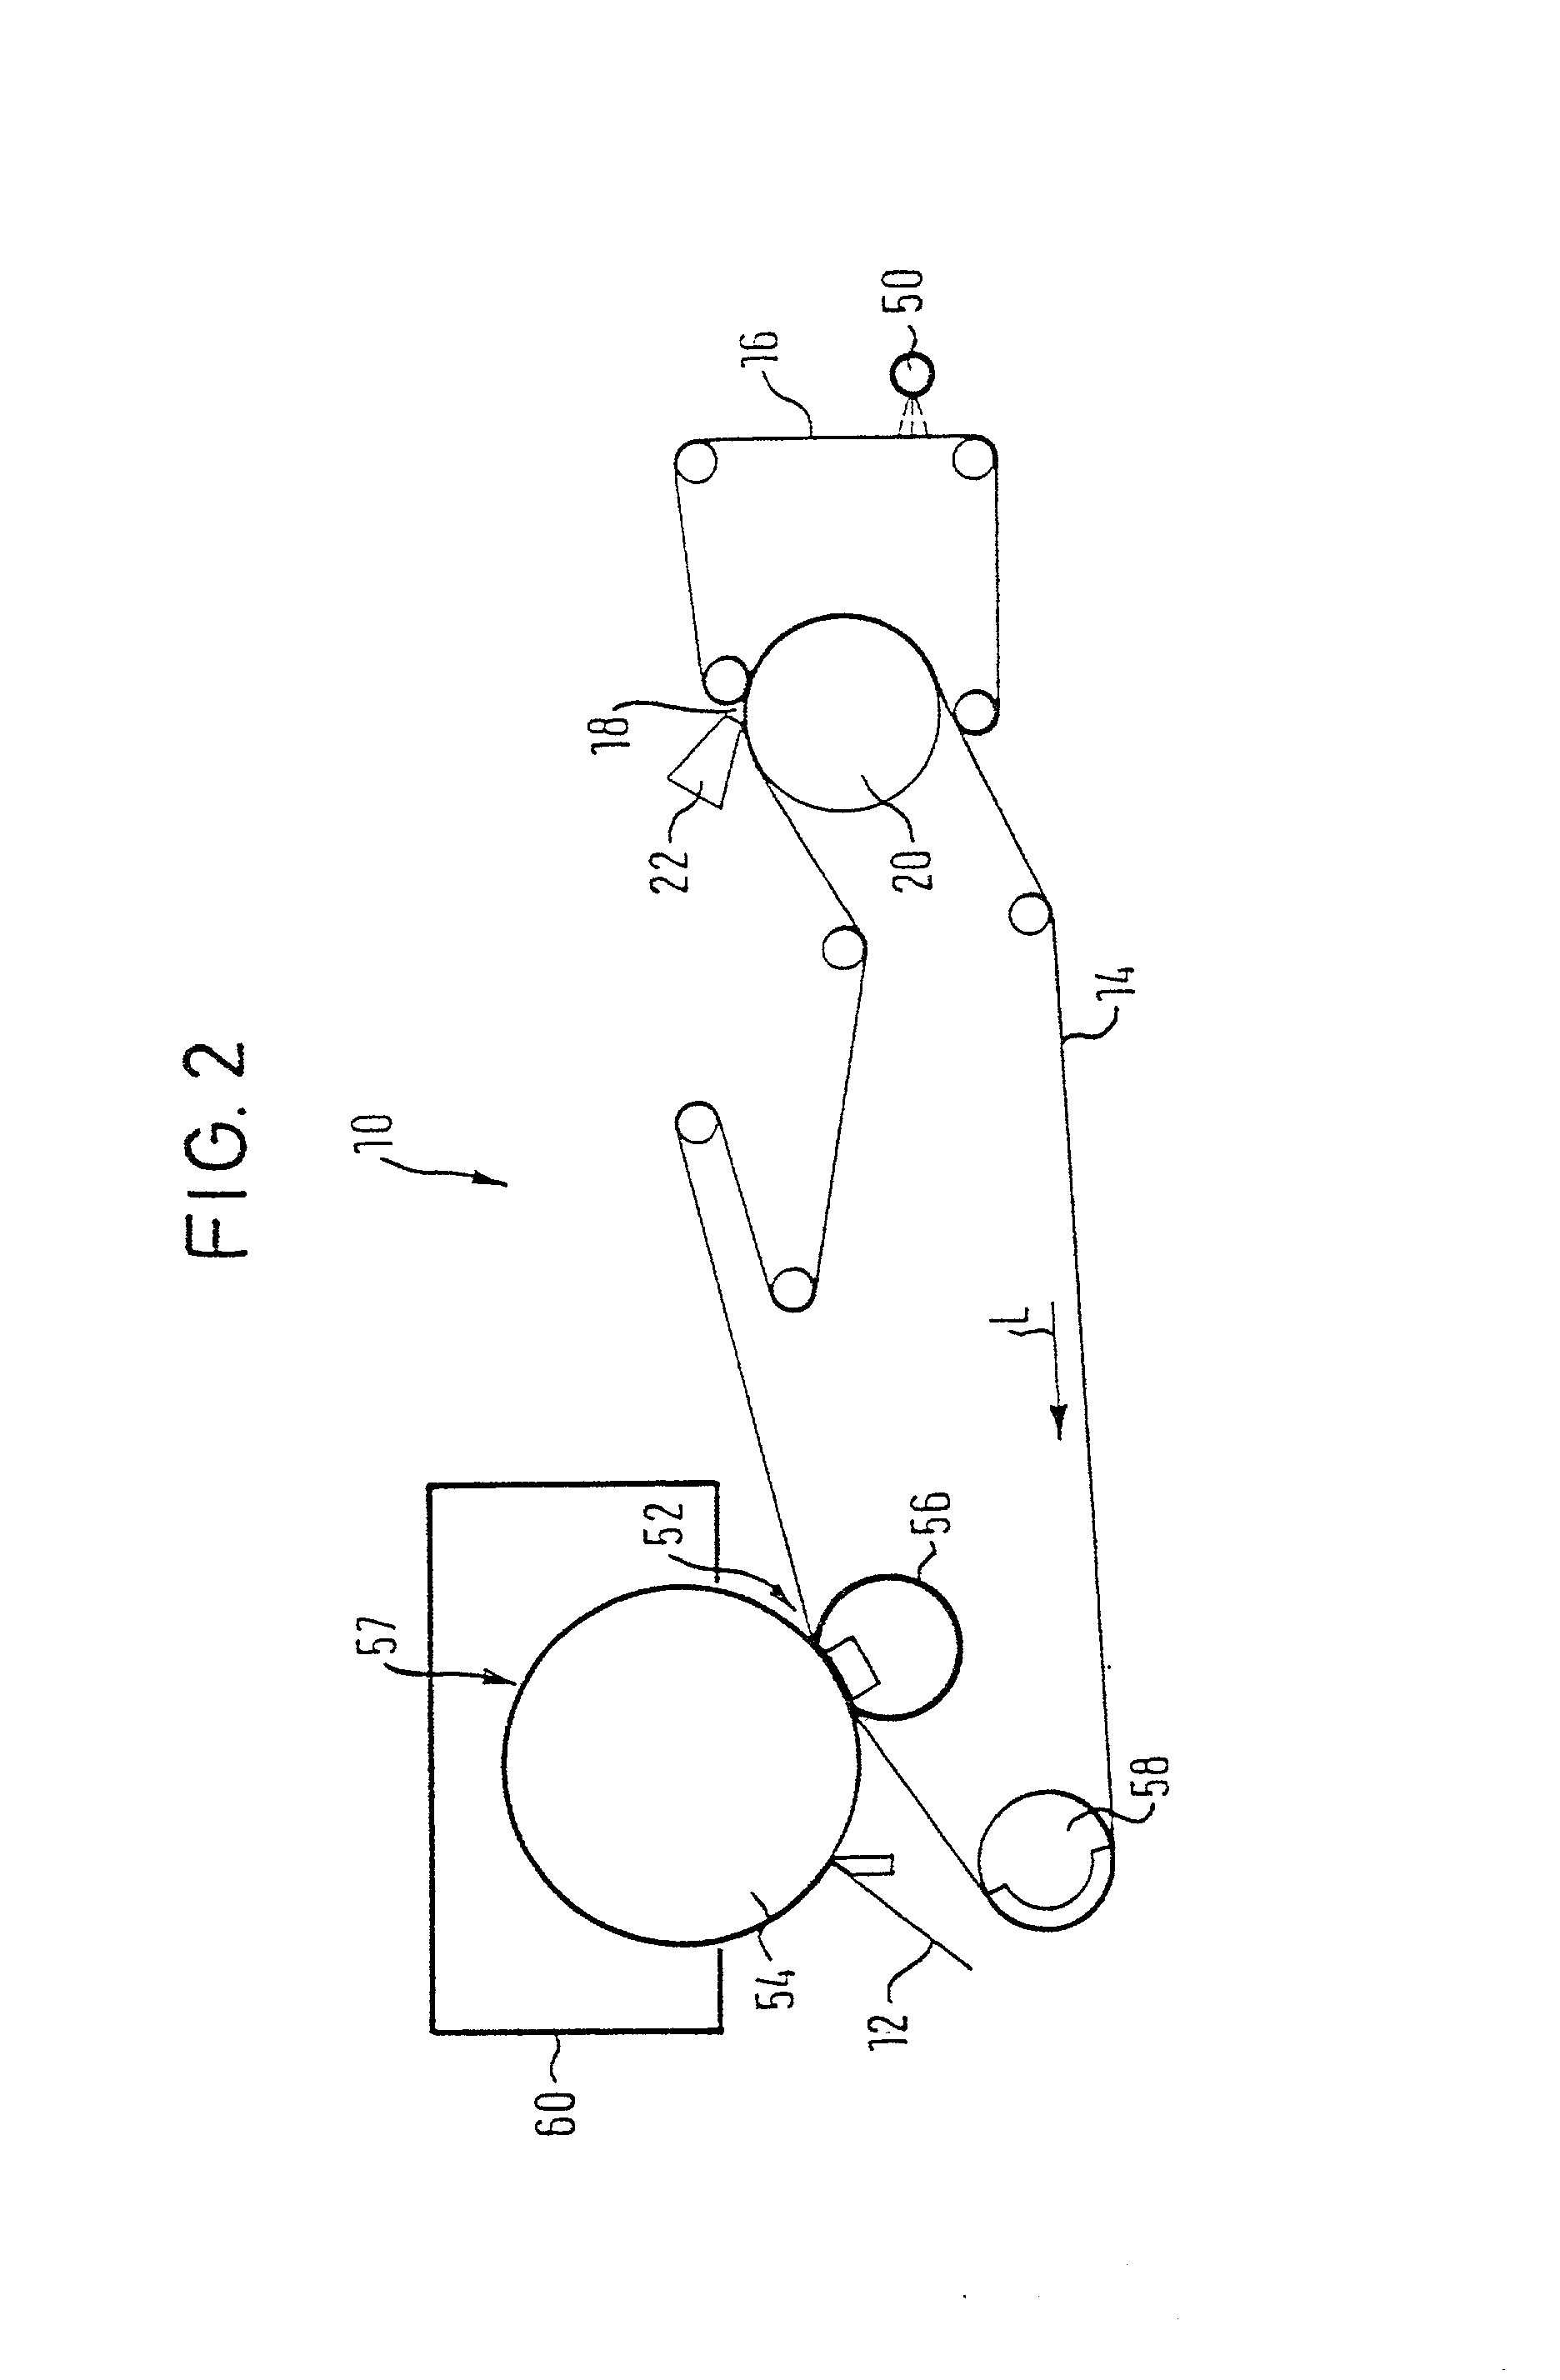 Machine and process for producing a tissue web